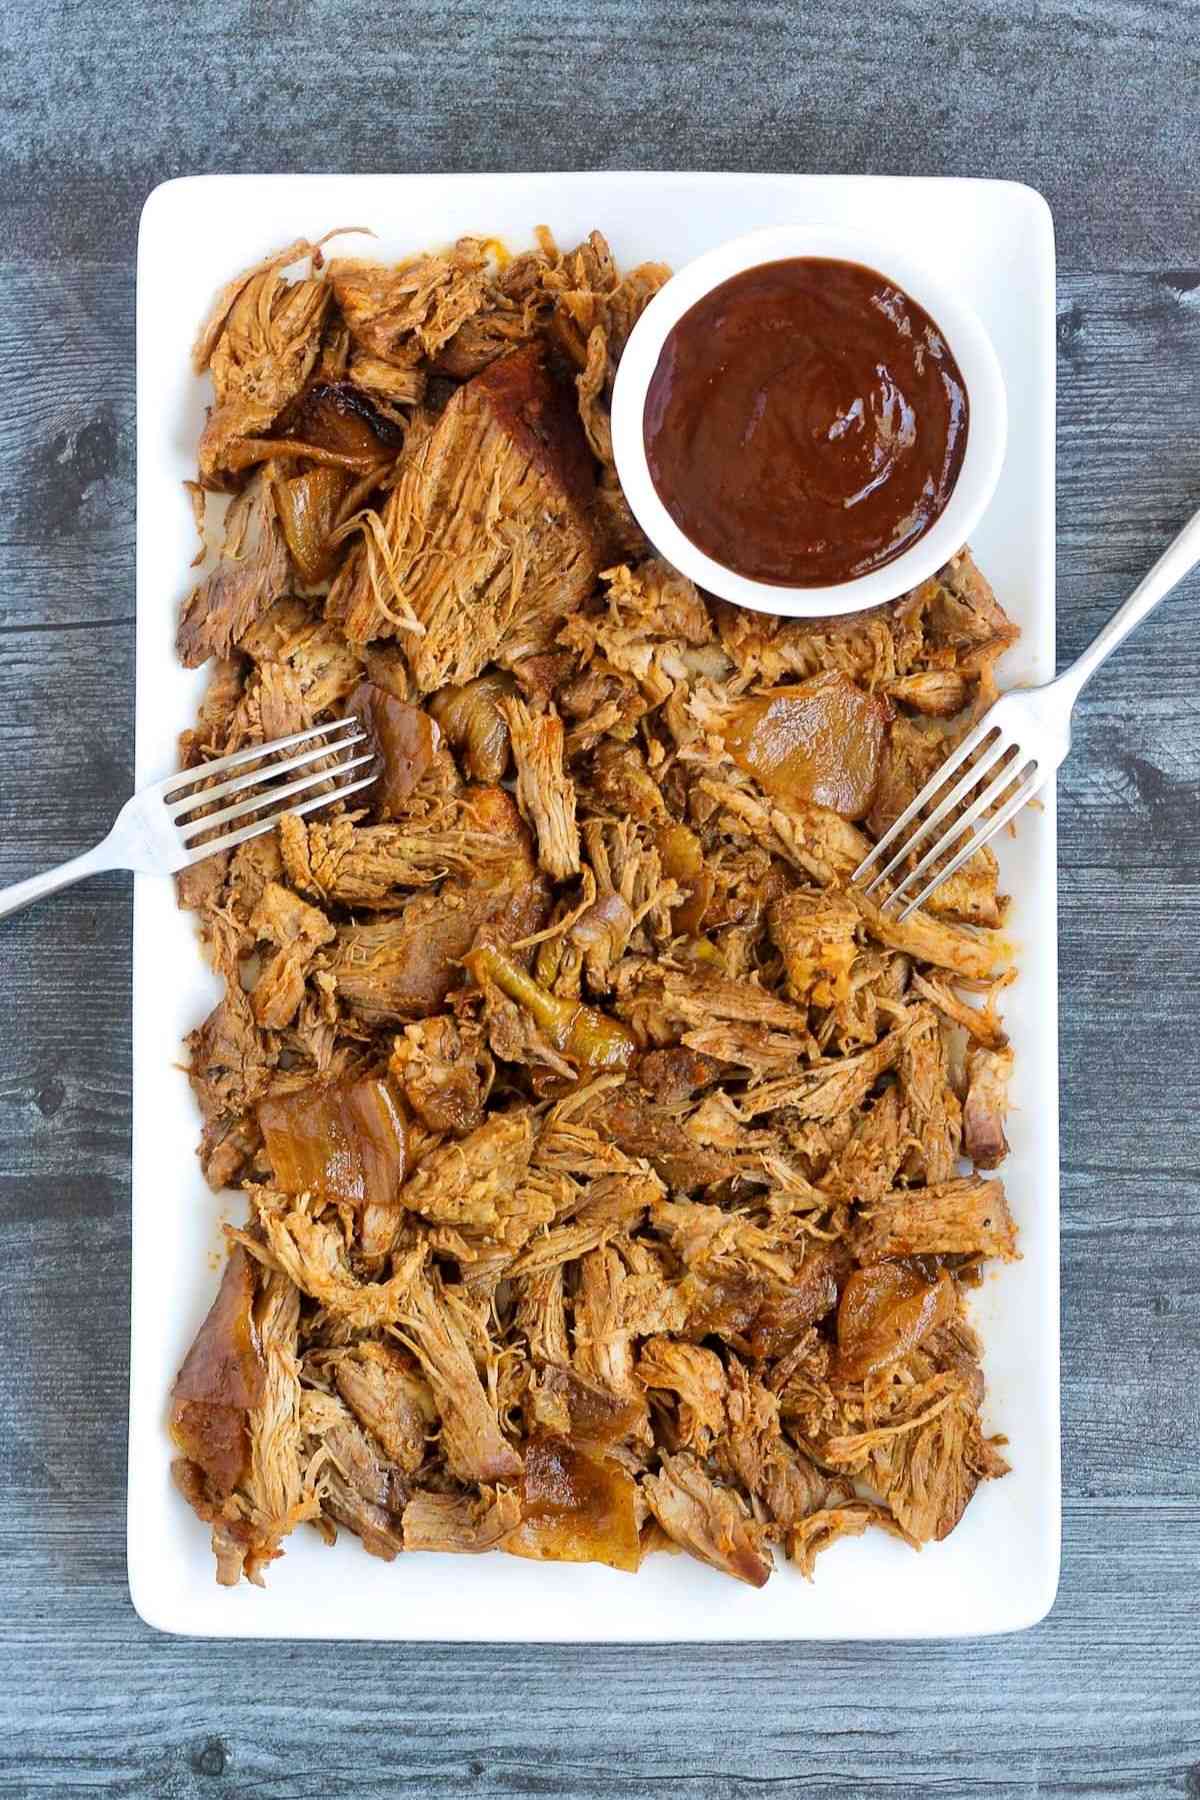 Pulled pork and a side of BBQ sauce with two forks on a serving tray.